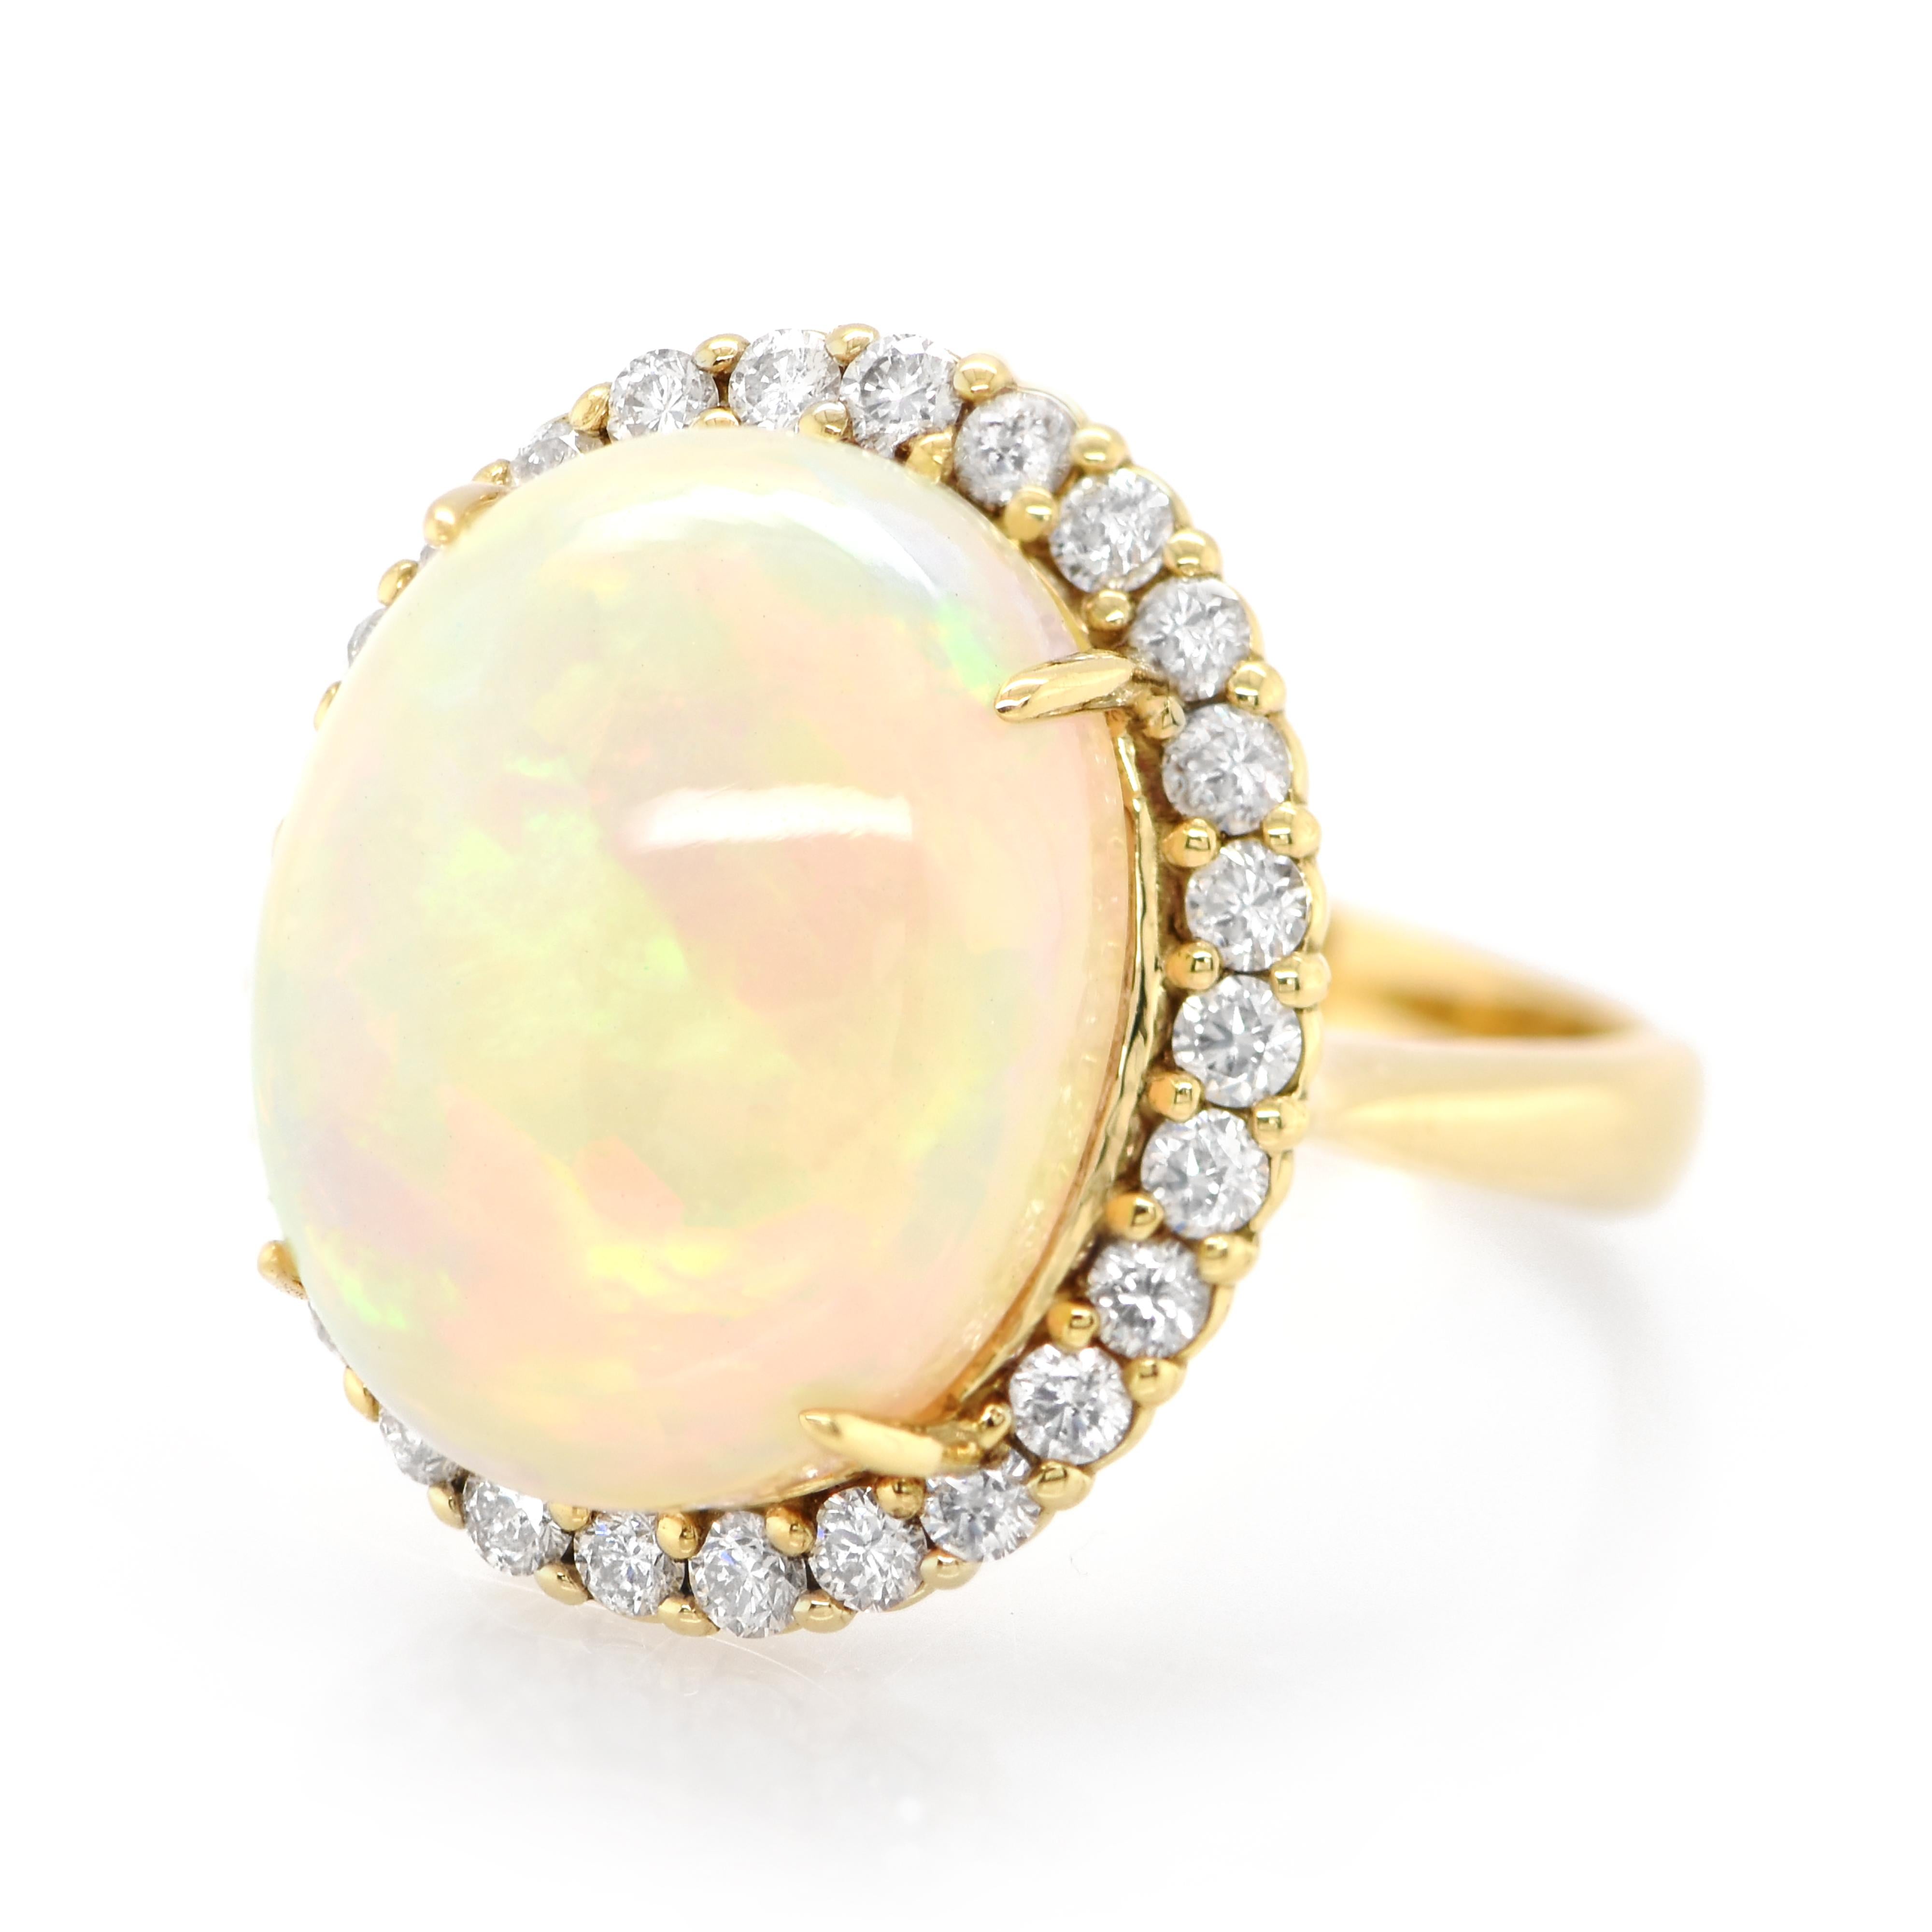 A beautiful ring featuring a 9.68 Carat Natural, White, Ethiopian Opal and 0.77 Carats of Diamond Accents set in 18K Gold. Opals are known for exhibiting flashes of rainbow colors known as 